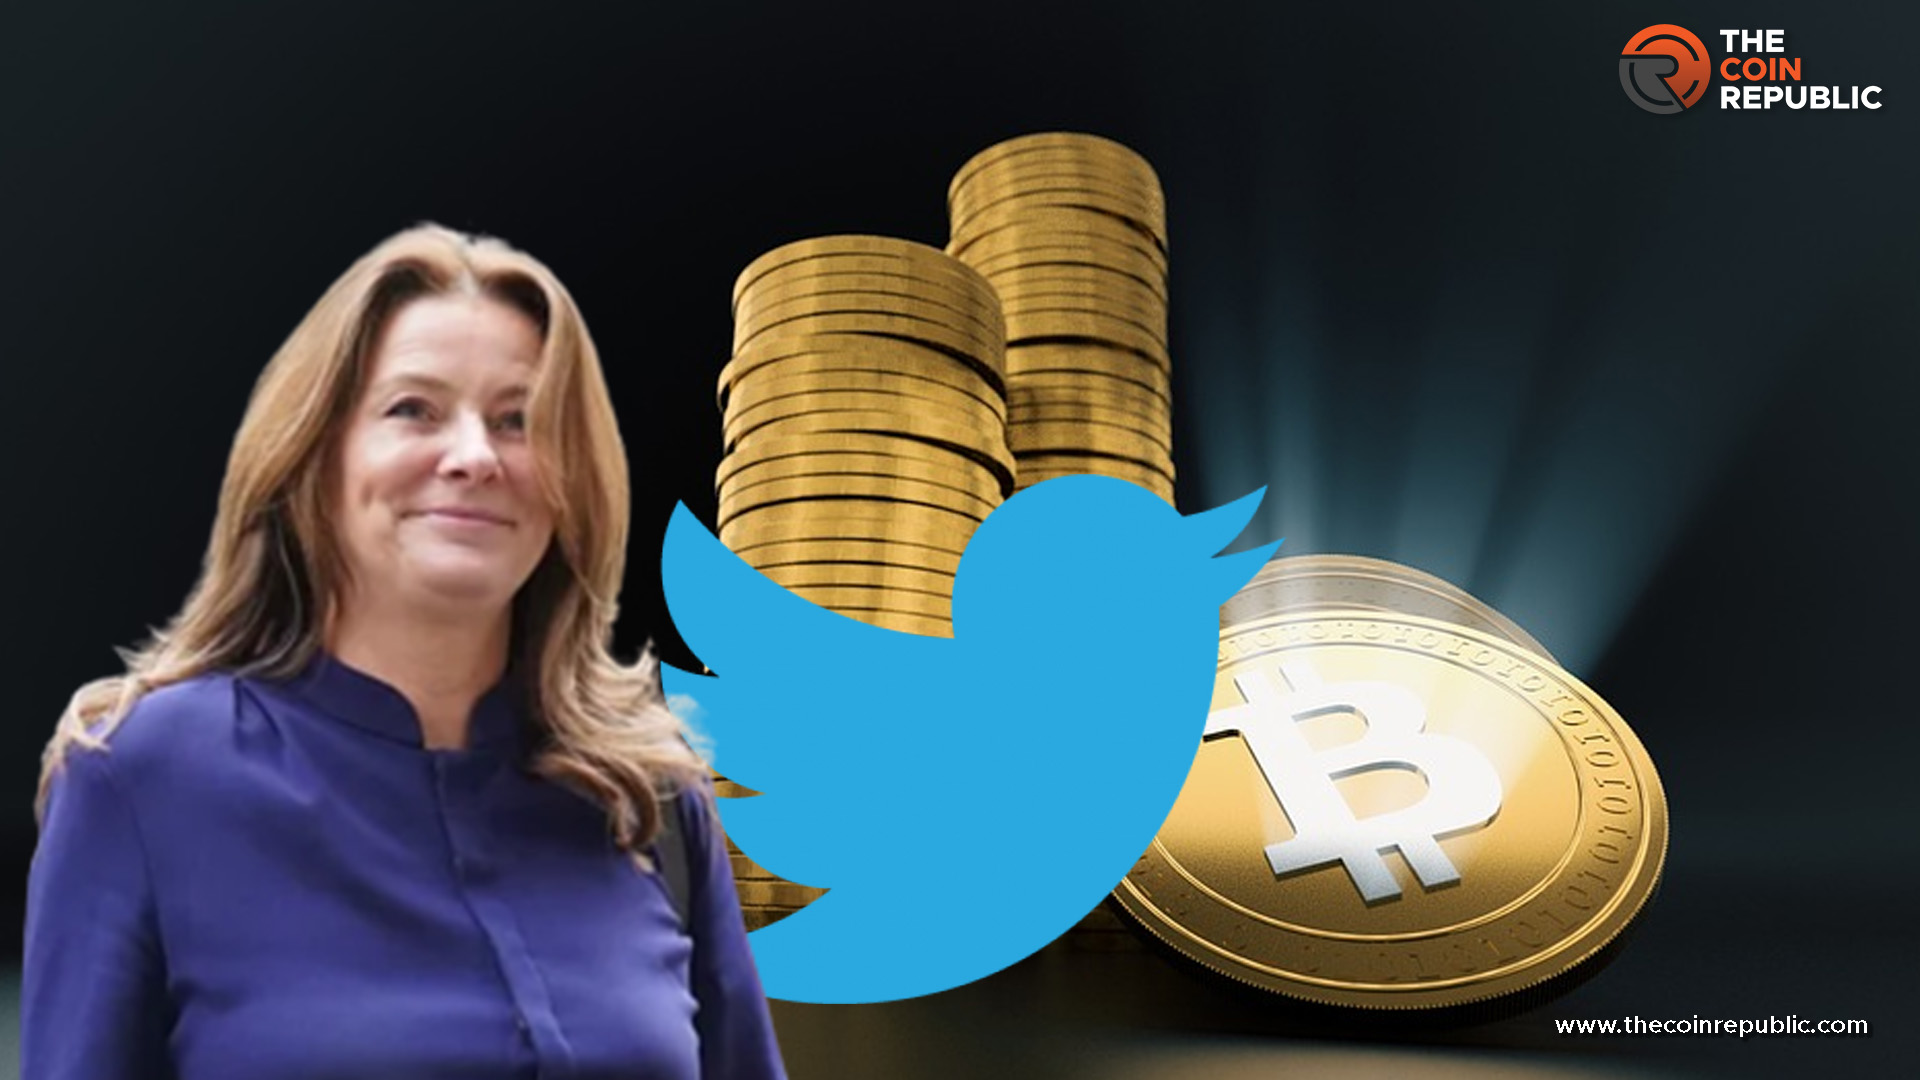 UK’s Cabinet Minister’s Twitter Account Hacked: To promote Crypto